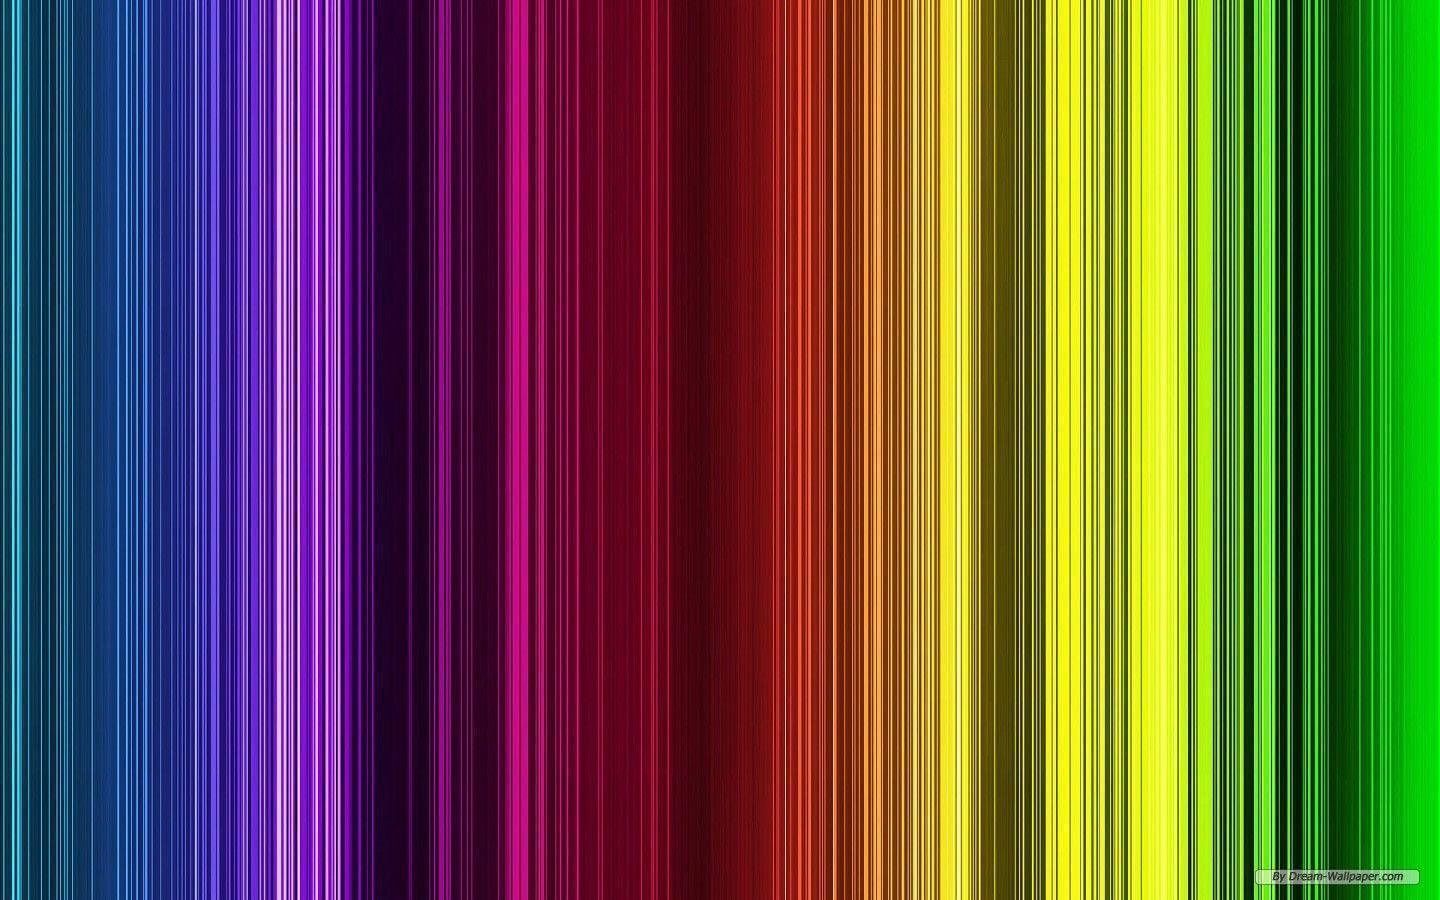 Colorful Background 4 305327 Image HD Wallpaper. Wallfoy.com